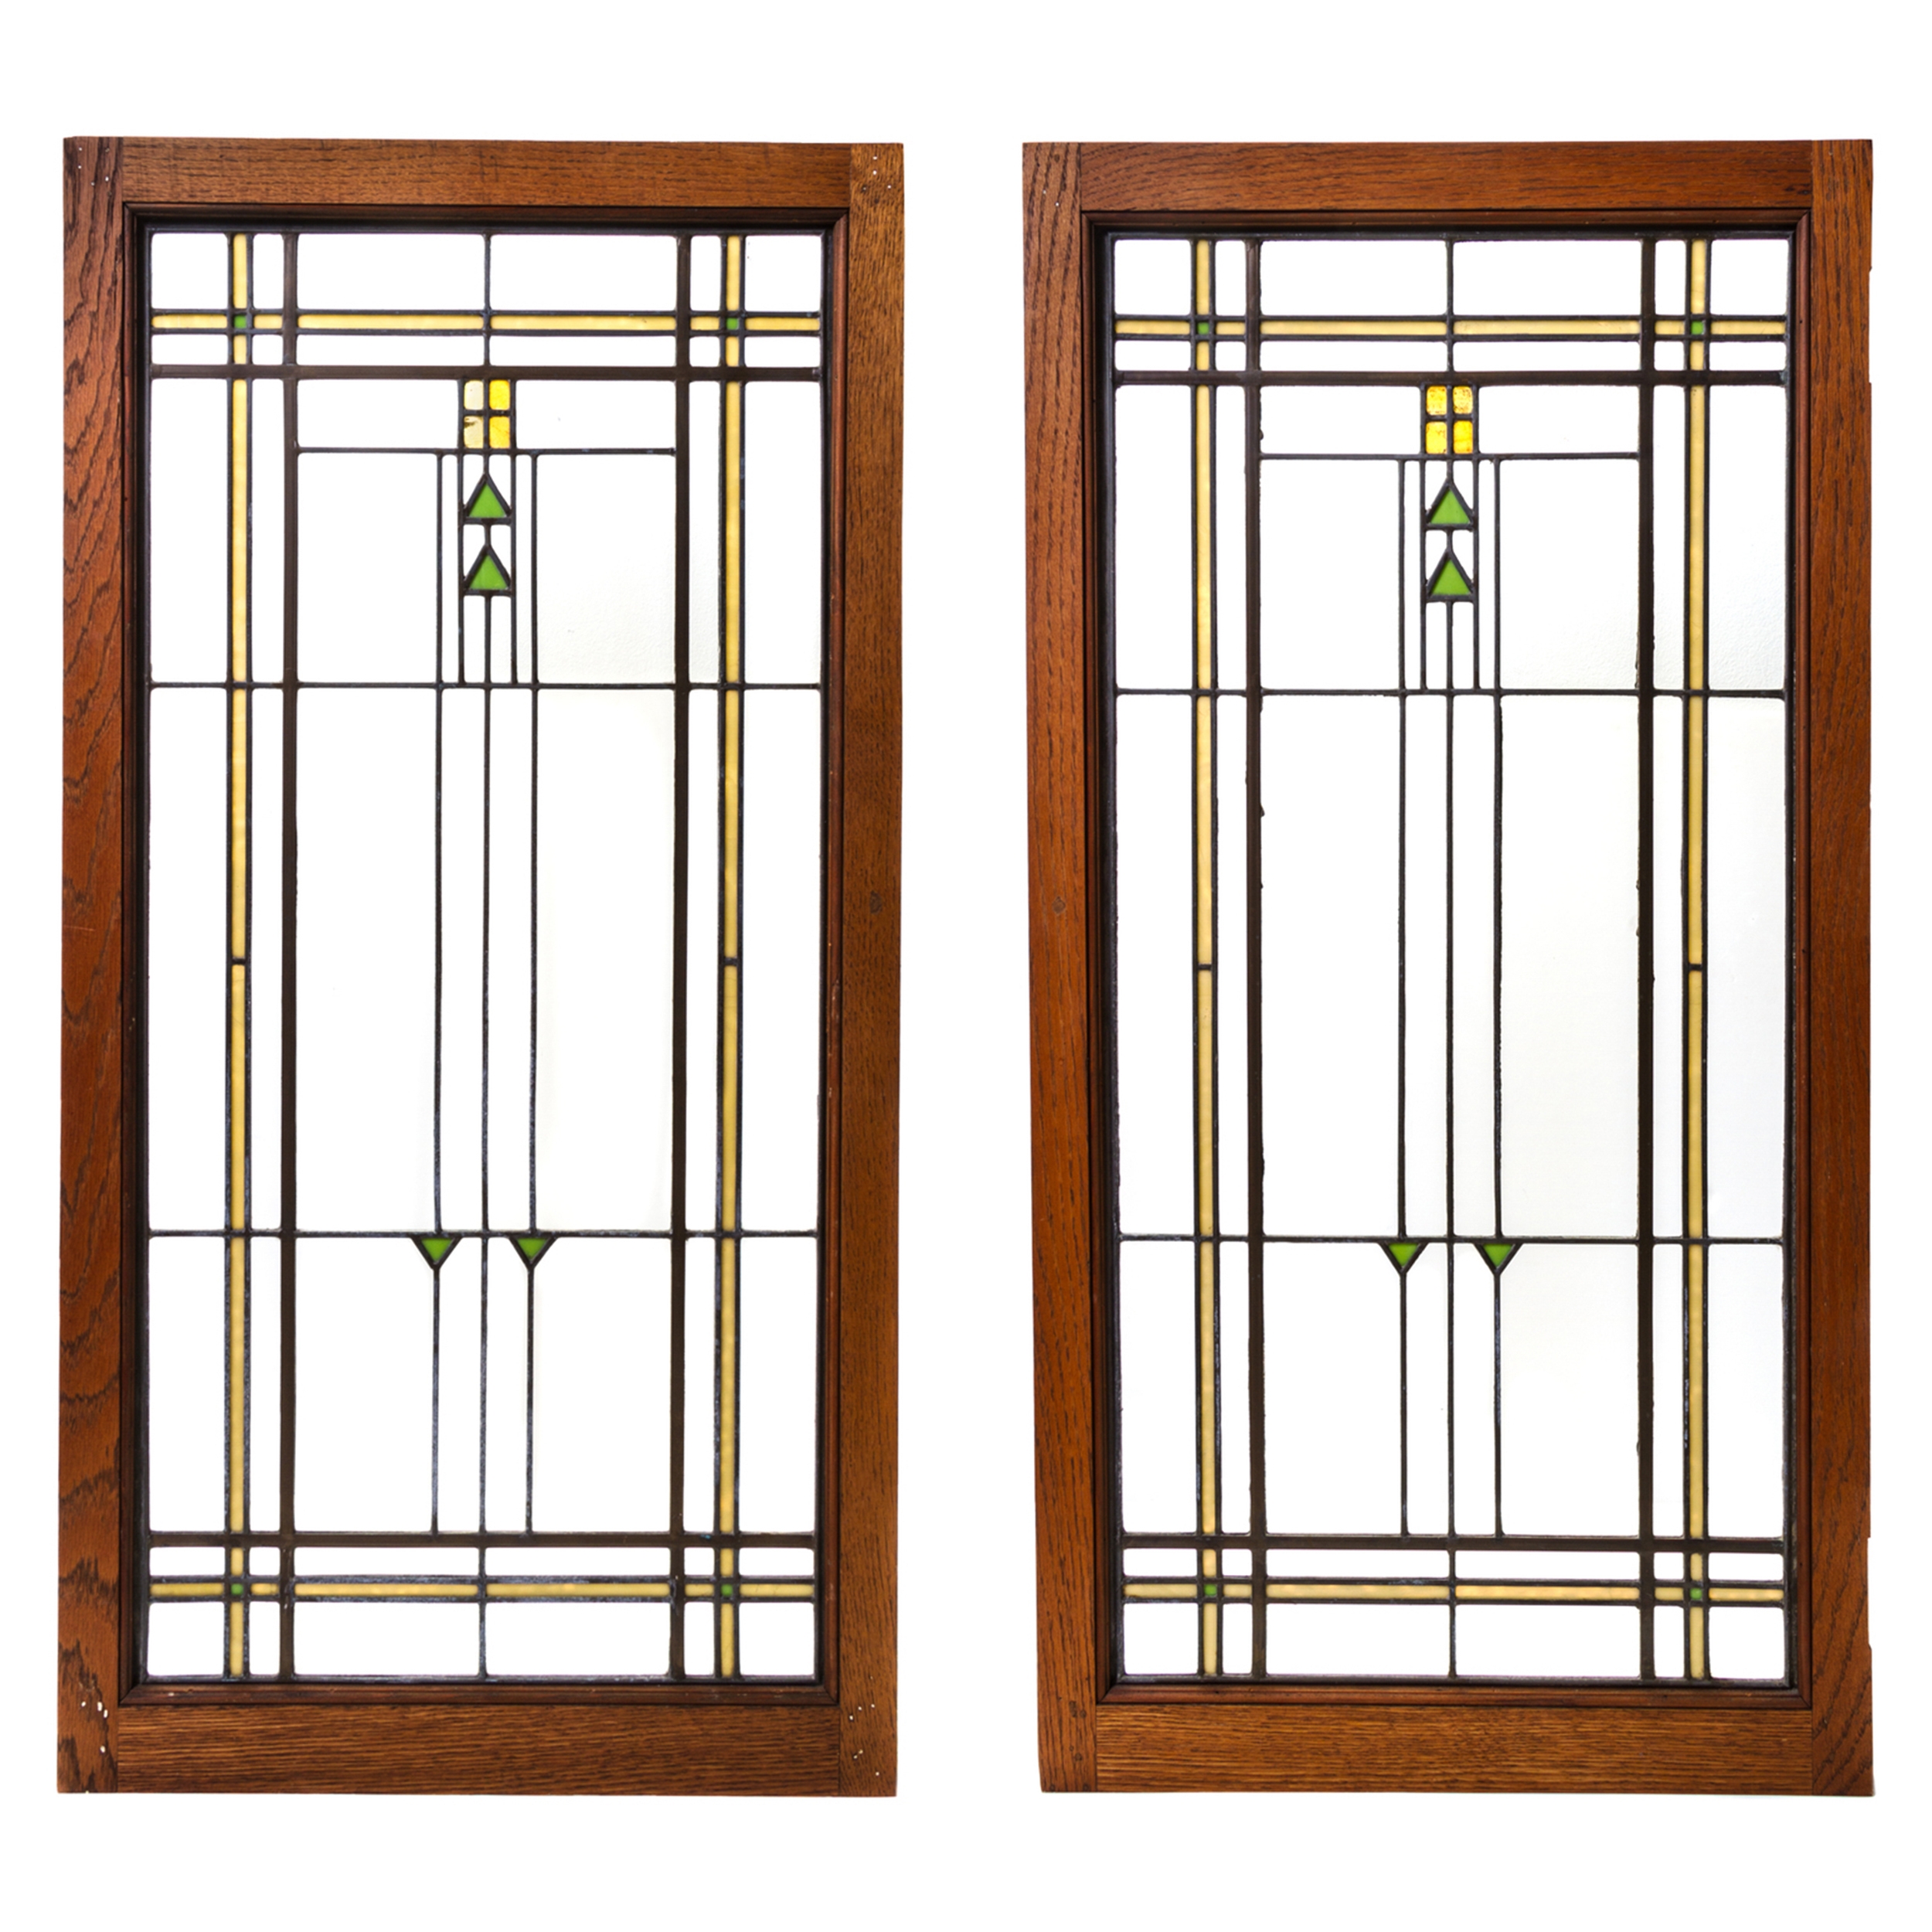 Artwork by Frank Lloyd Wright, Attributed to Frank Lloyd Wright, Pair of Arts and Crafts Leaded Glass Casement Windows, Made of Leaded Glass